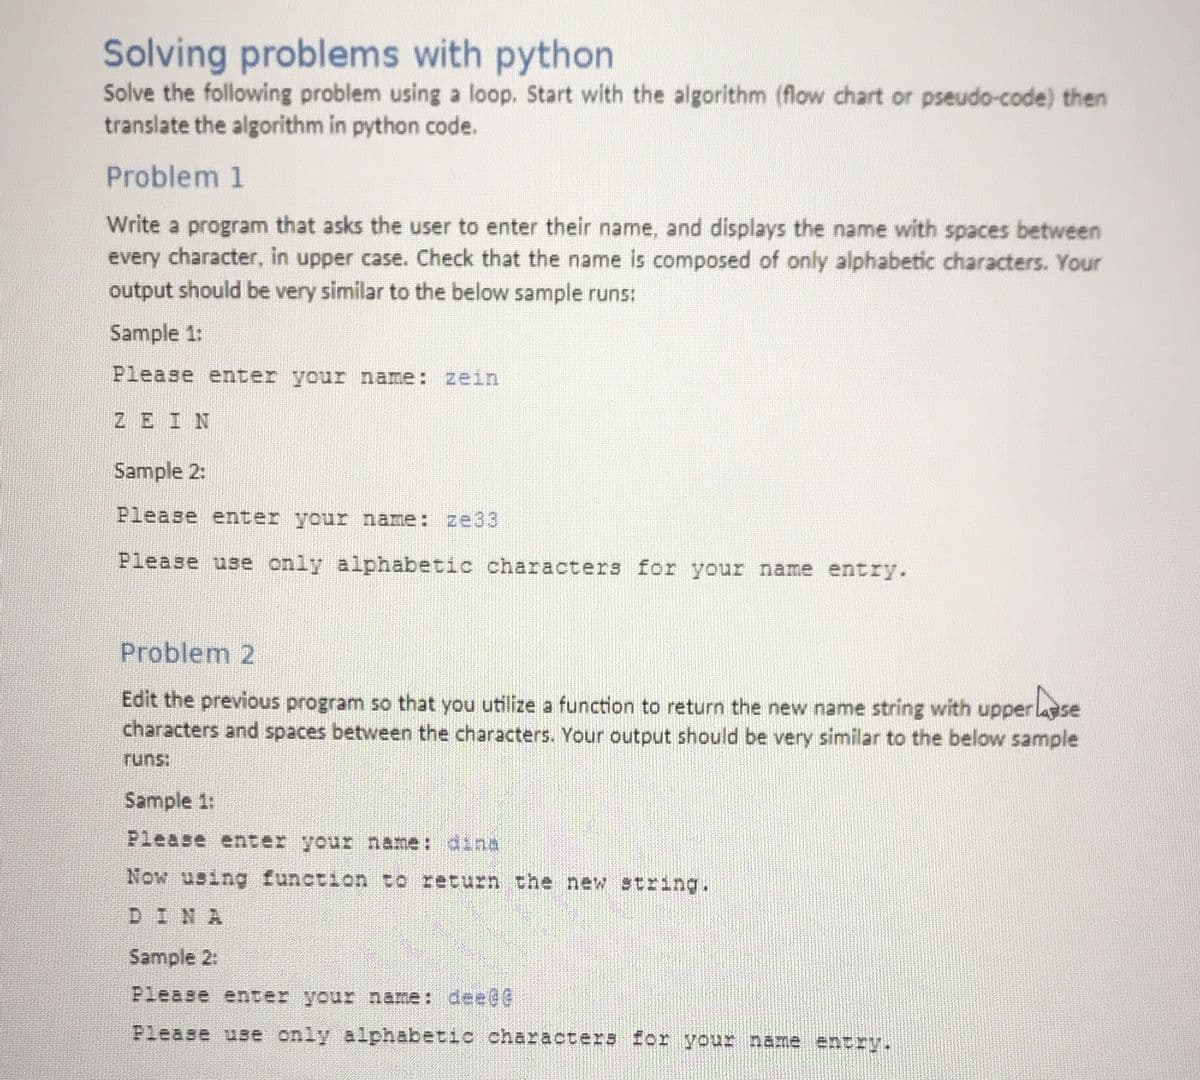 Solving problems with python
Solve the following problem using a loop. Start with the algorithm (flow chart or pseudo-code) then
translate the algorithm in python code.
Problem 1
Write a program that asks the user to enter their name, and displays the name with spaces between
every character, in upper case. Check that the name is composed of only alphabetic characters. Your
output should be very similar to the below sample runs:
Sample 1:
Please enter your name: zein
ZEIN
Sample 2:
Please enter your name: ze33
Please use only alphabetic characters for your name entry.
Problem 2
Edit the previous program so that you utilize a function to return the new name string with upper lasse
characters and spaces between the characters. Your output should be very similar to the below sample
runs:
Sample 1:
Please enter your name: dina
Now using function to return the new string.
DINA
Sample 2:
Please enter your name: deee
Please use only alphabetic characters for your name entry.
